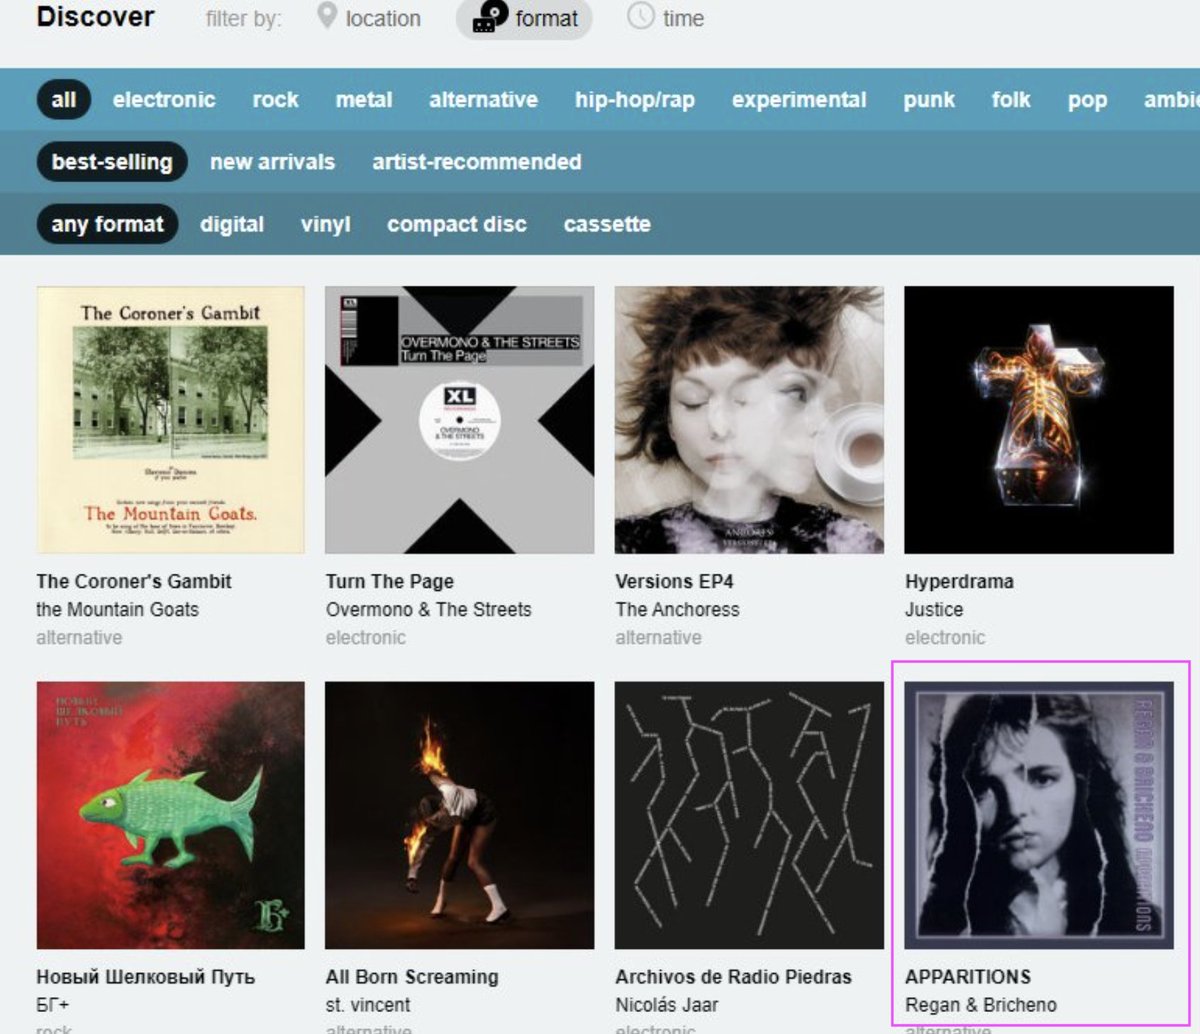 Well, that'll do nicely. Thanks Bandcamp! #BandcampFriday